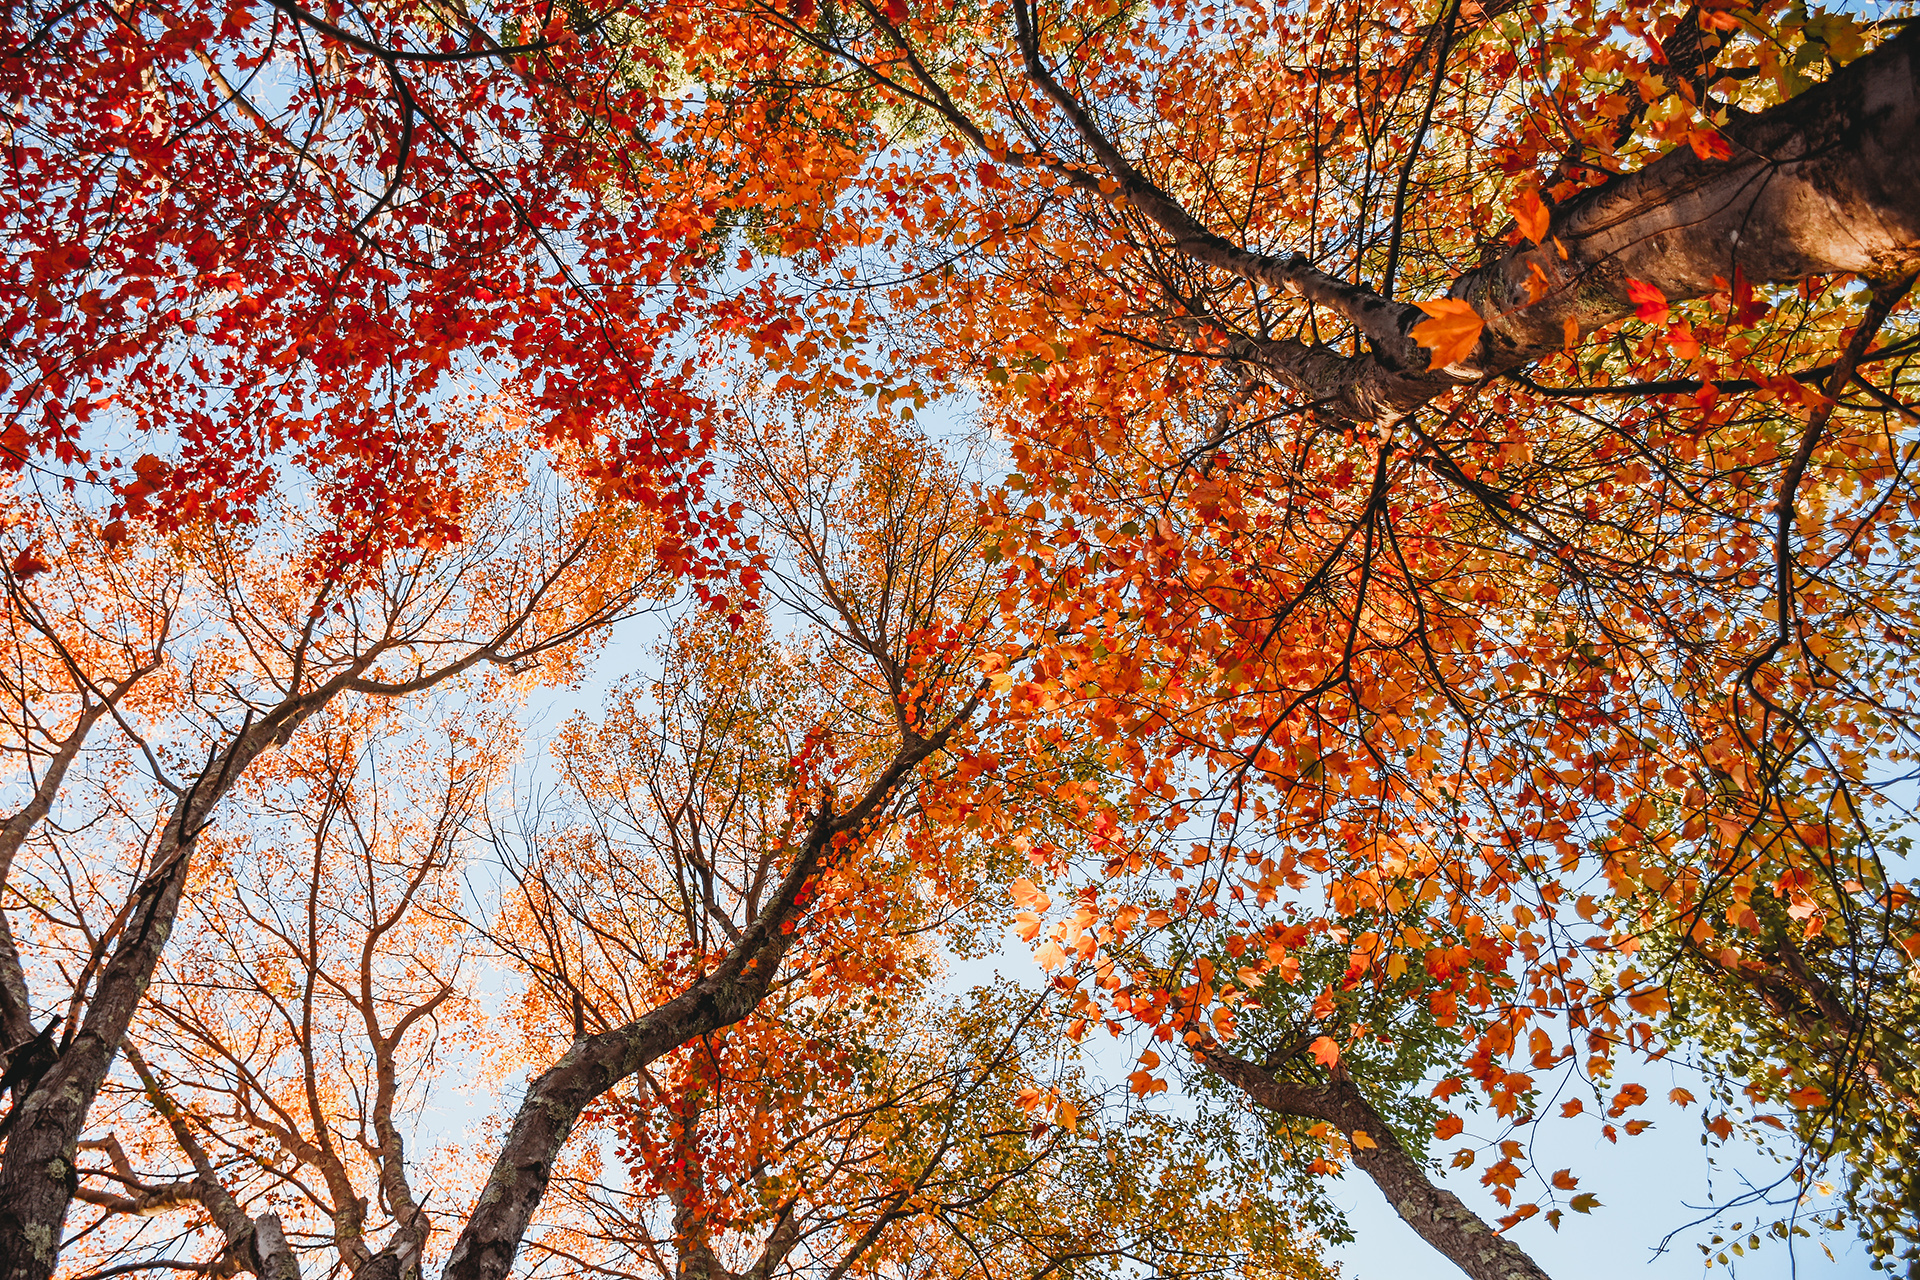 Looking up through an autumn tree canopy